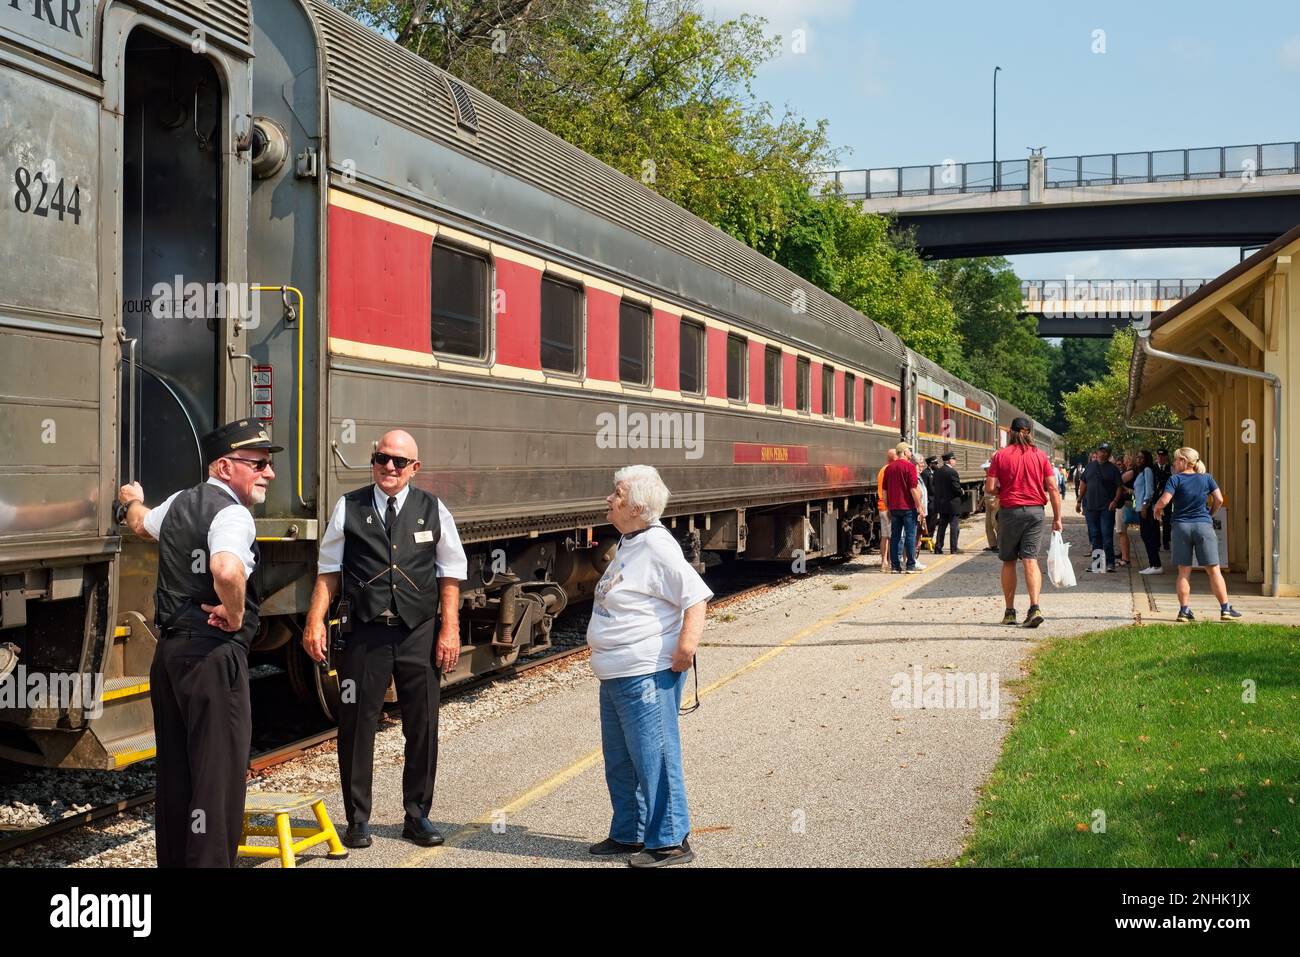 Akron, OH, USA - September 15, 2022: Passengers and crew on a Cuyahoga Valley Scenic Railroad train stretch their legs during a stop at Akron Northsid Stock Photo